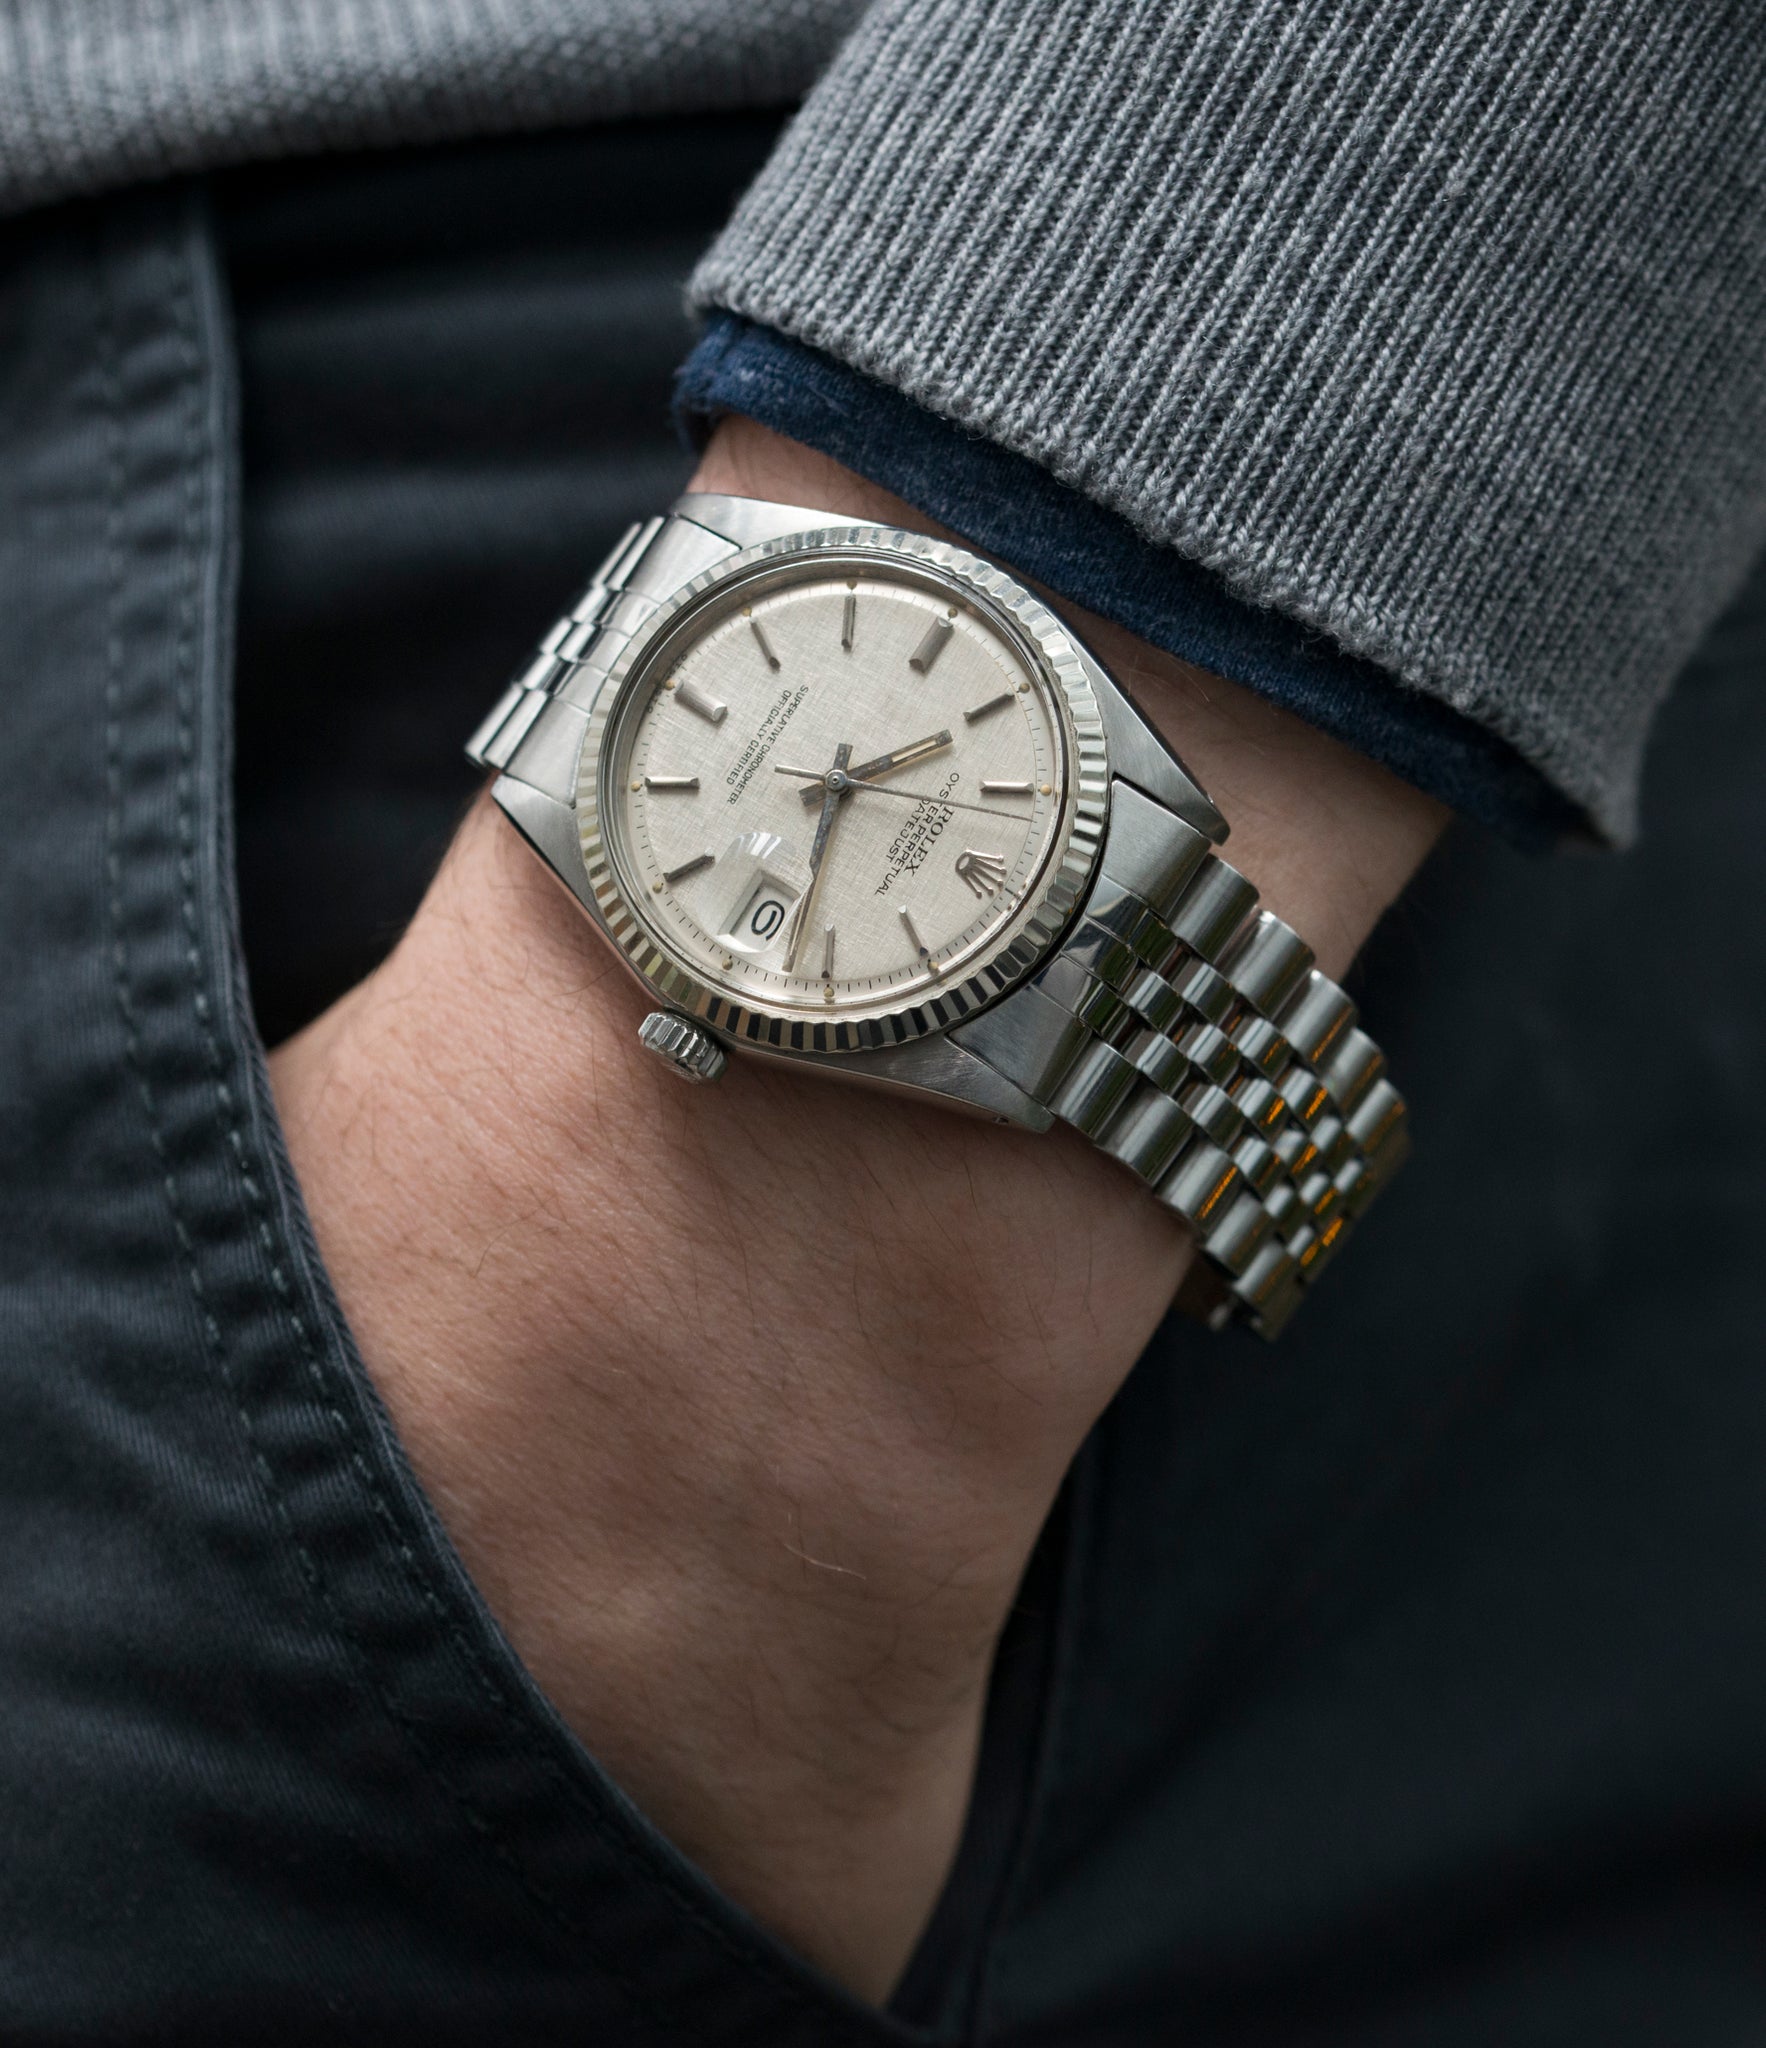 cool vintage Datejust 1601  Rolex linen dial Oyster Perpetual vintage automatic steel sport dress watch for sale online at A Collected Man London UK specialist rare vintage watches